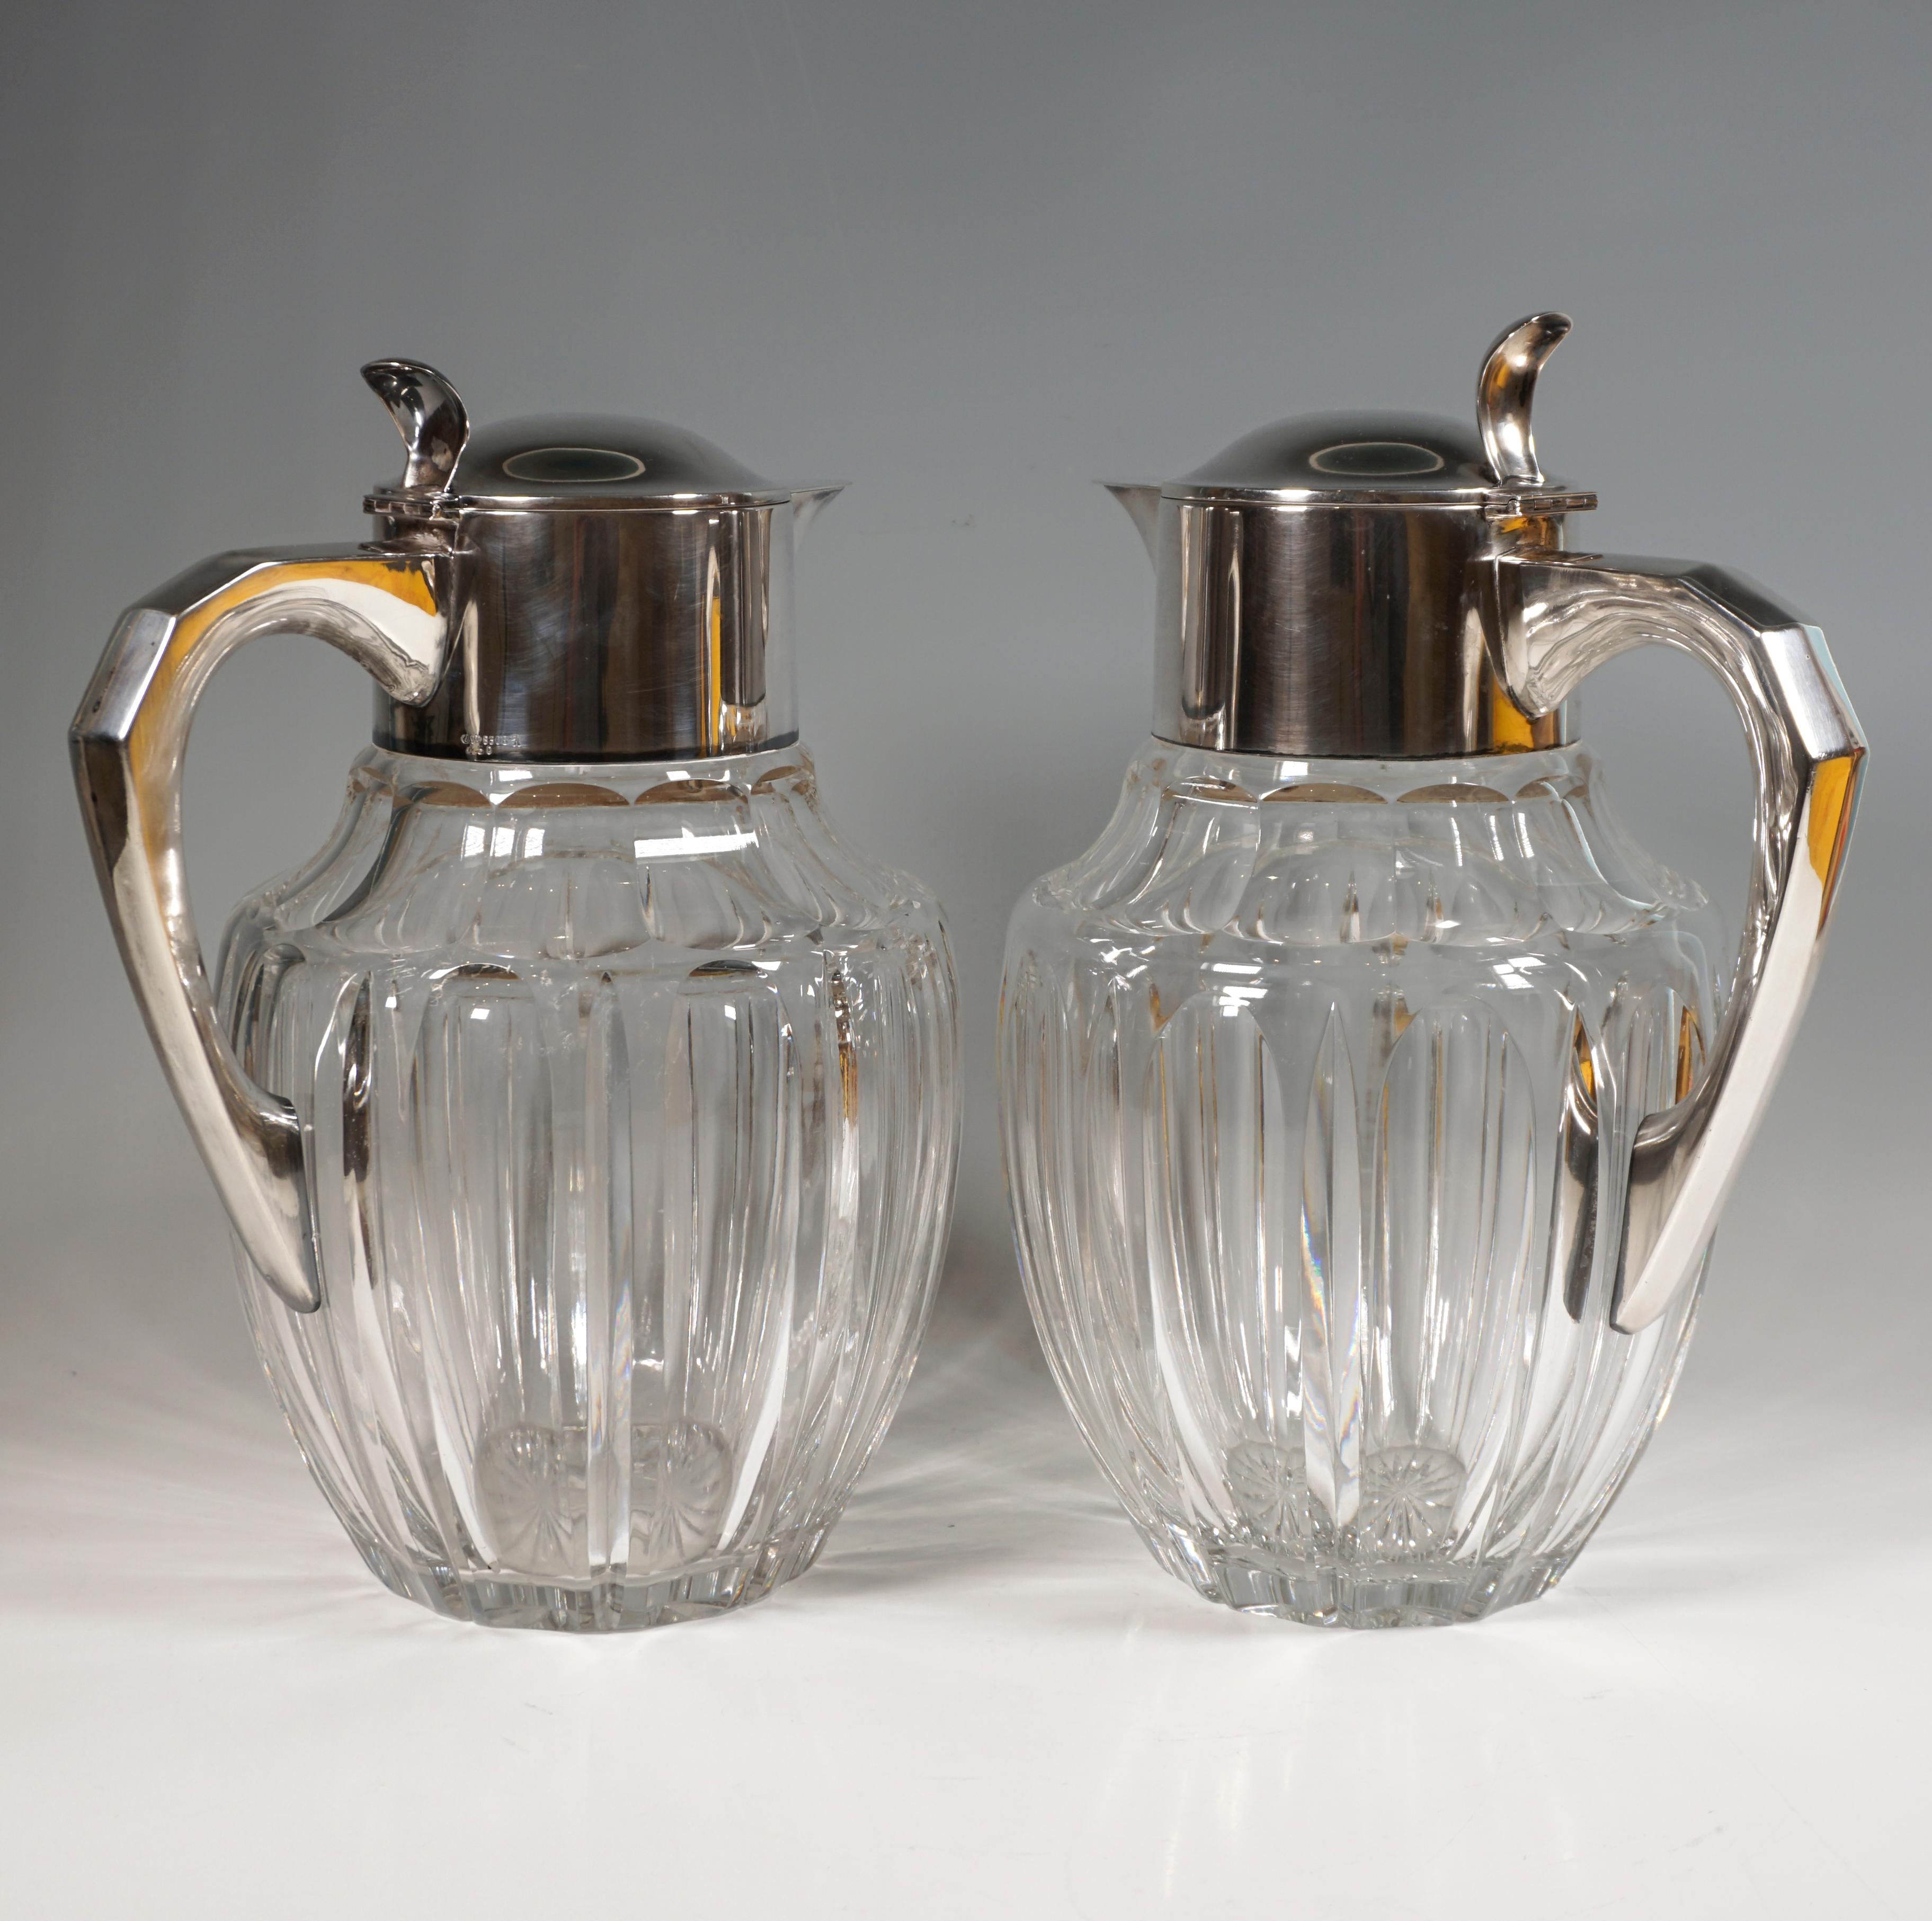 A pair of voluminous, bulbous, cut clear glass carafes on a round base, plain, smooth silver mountings with hinged lids with thumb rests and J-shaped handles with beveled accents on the outside.

Dimensions:
height: 31.0 cm / 12.20 in
width: